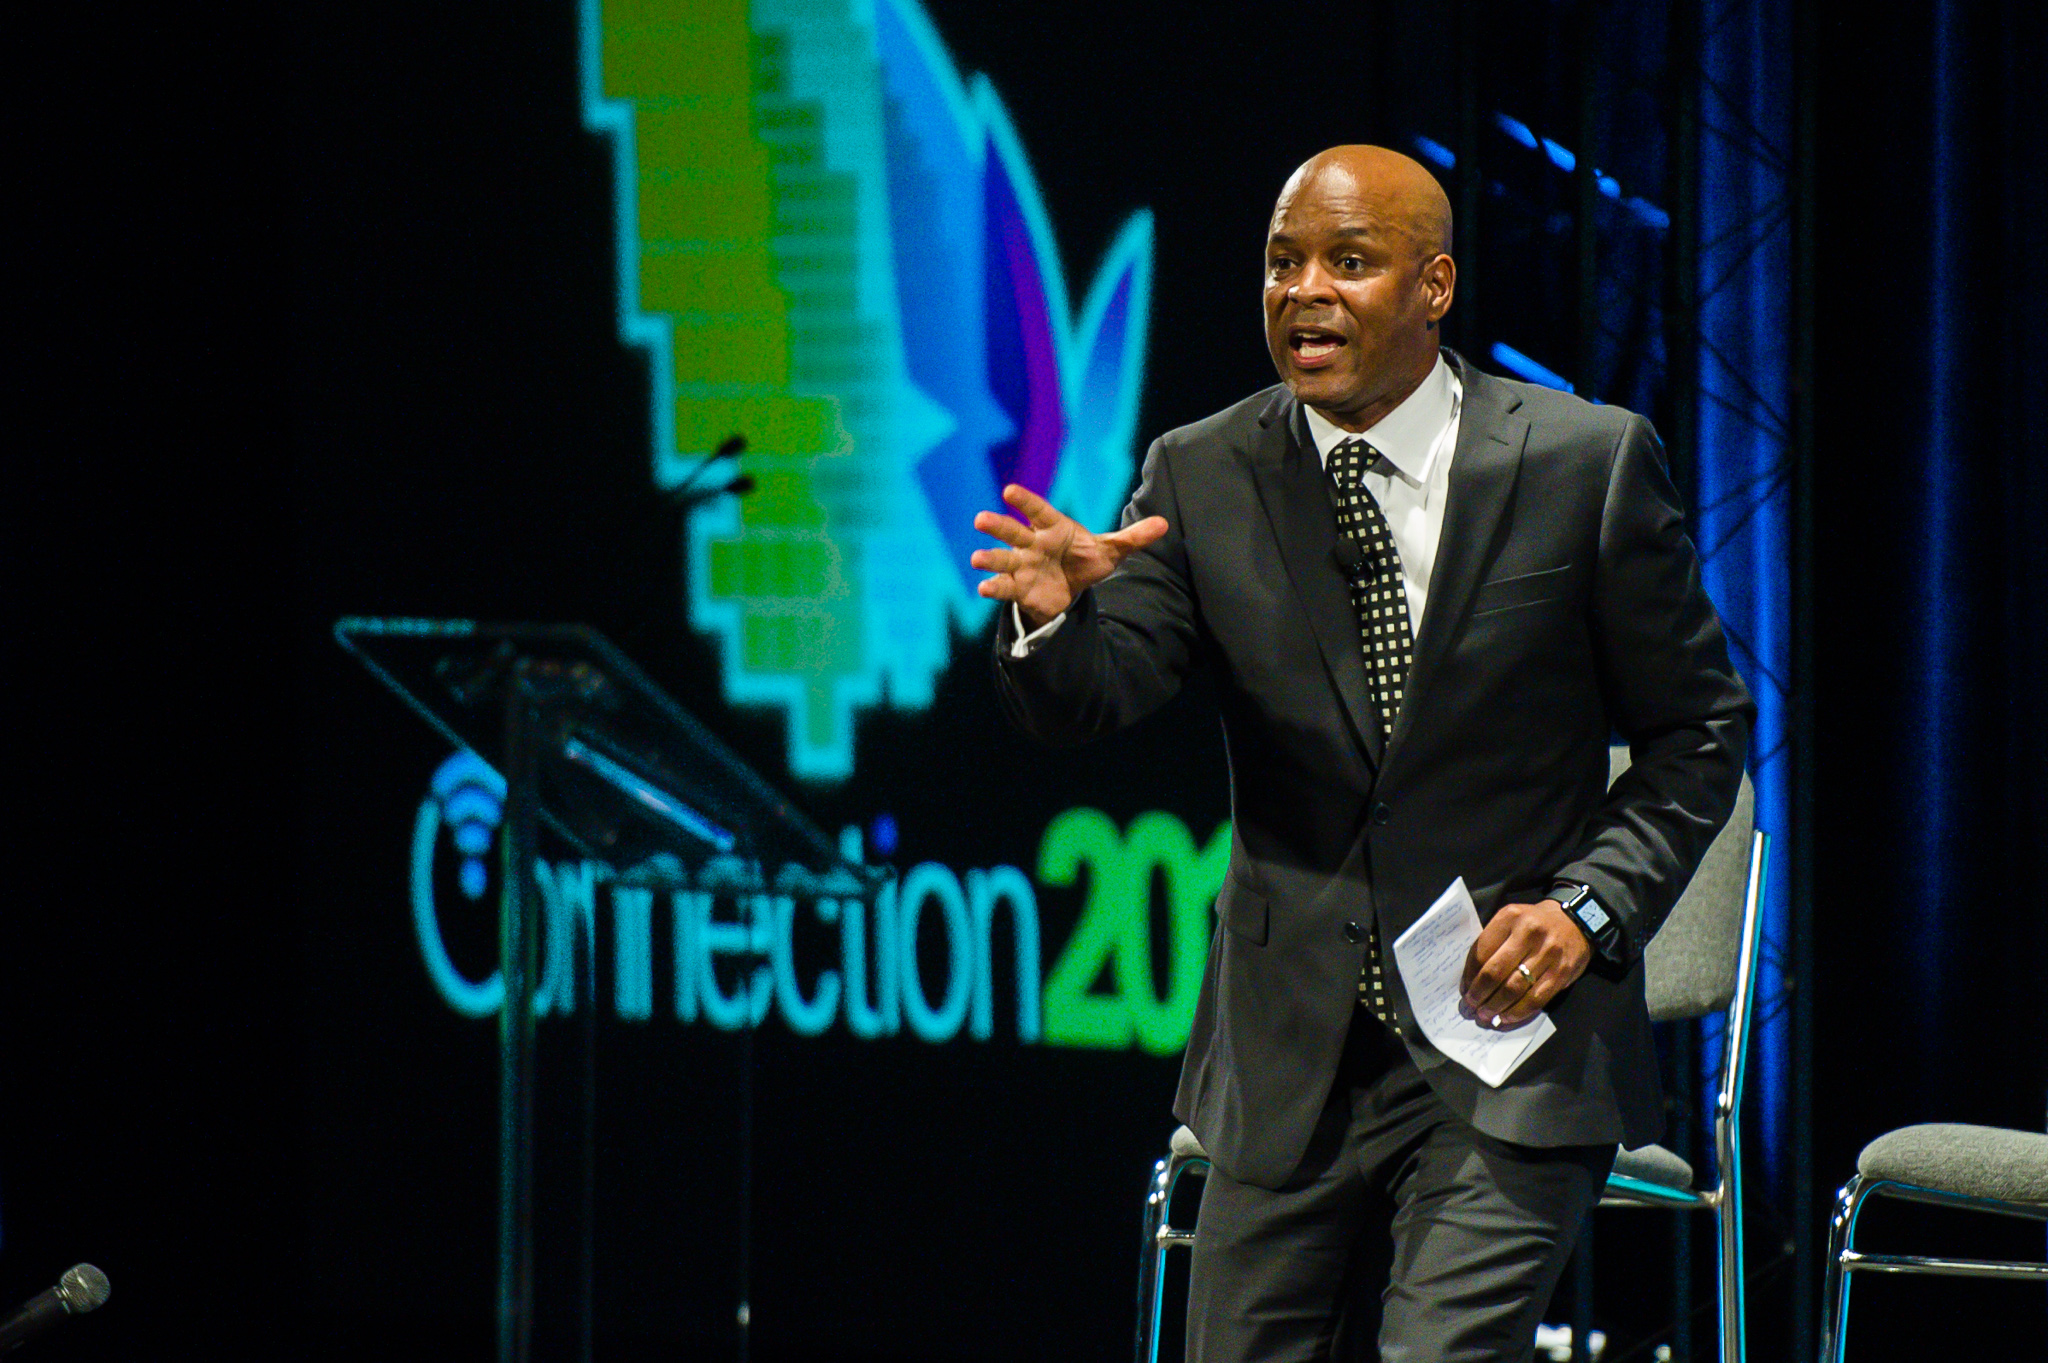 Whetstone Inc President Adrian Davis inspires the community to continue forging ahead with a very personal message at WBM’s Connection 2016.